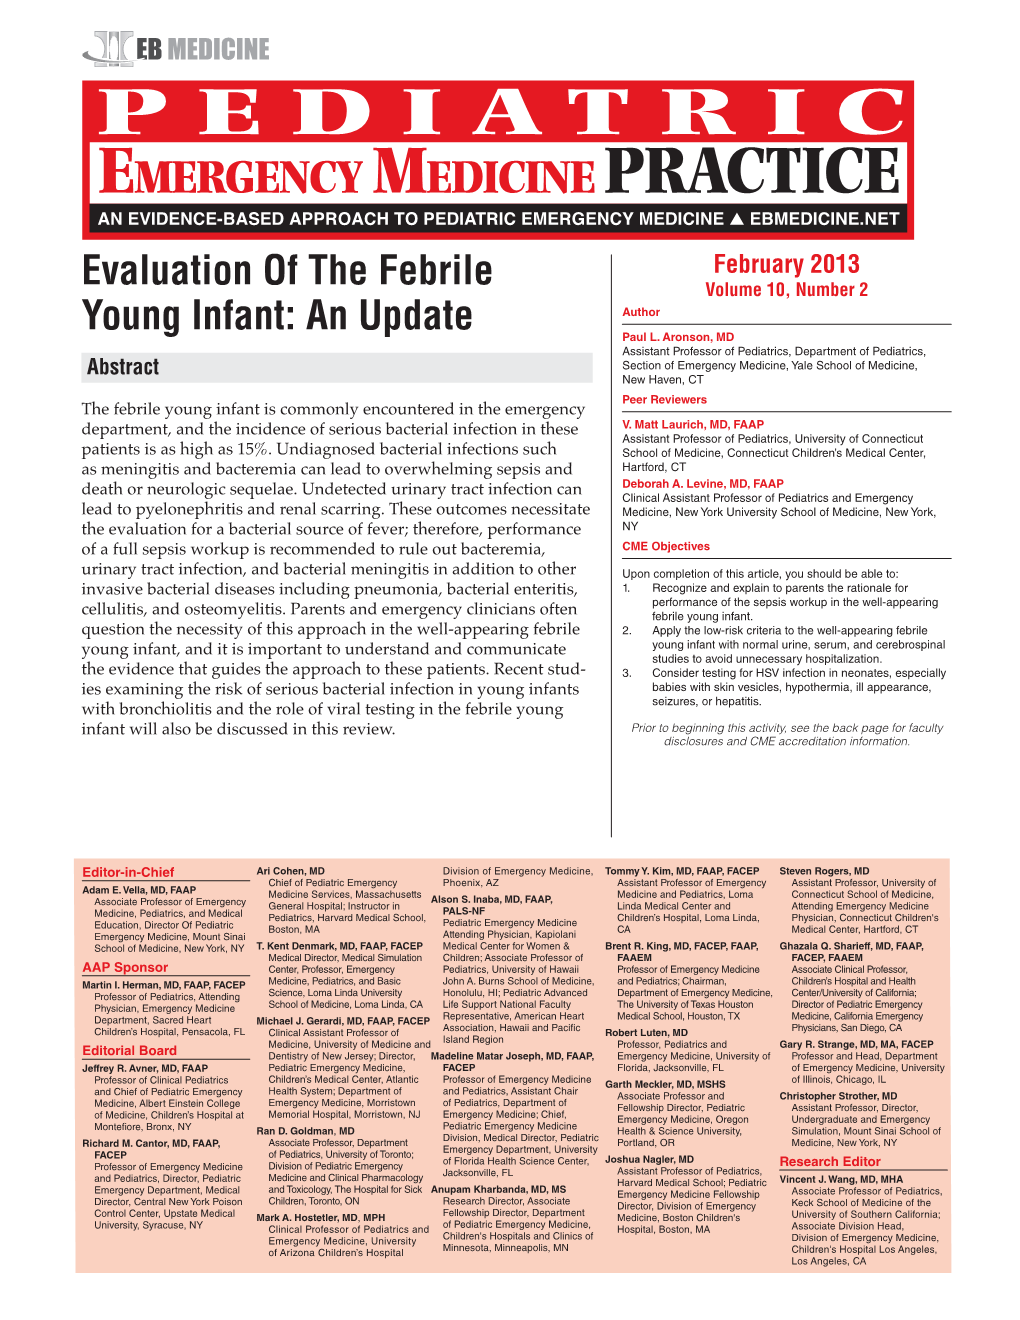 Evaluation of the Febrile Young Infant